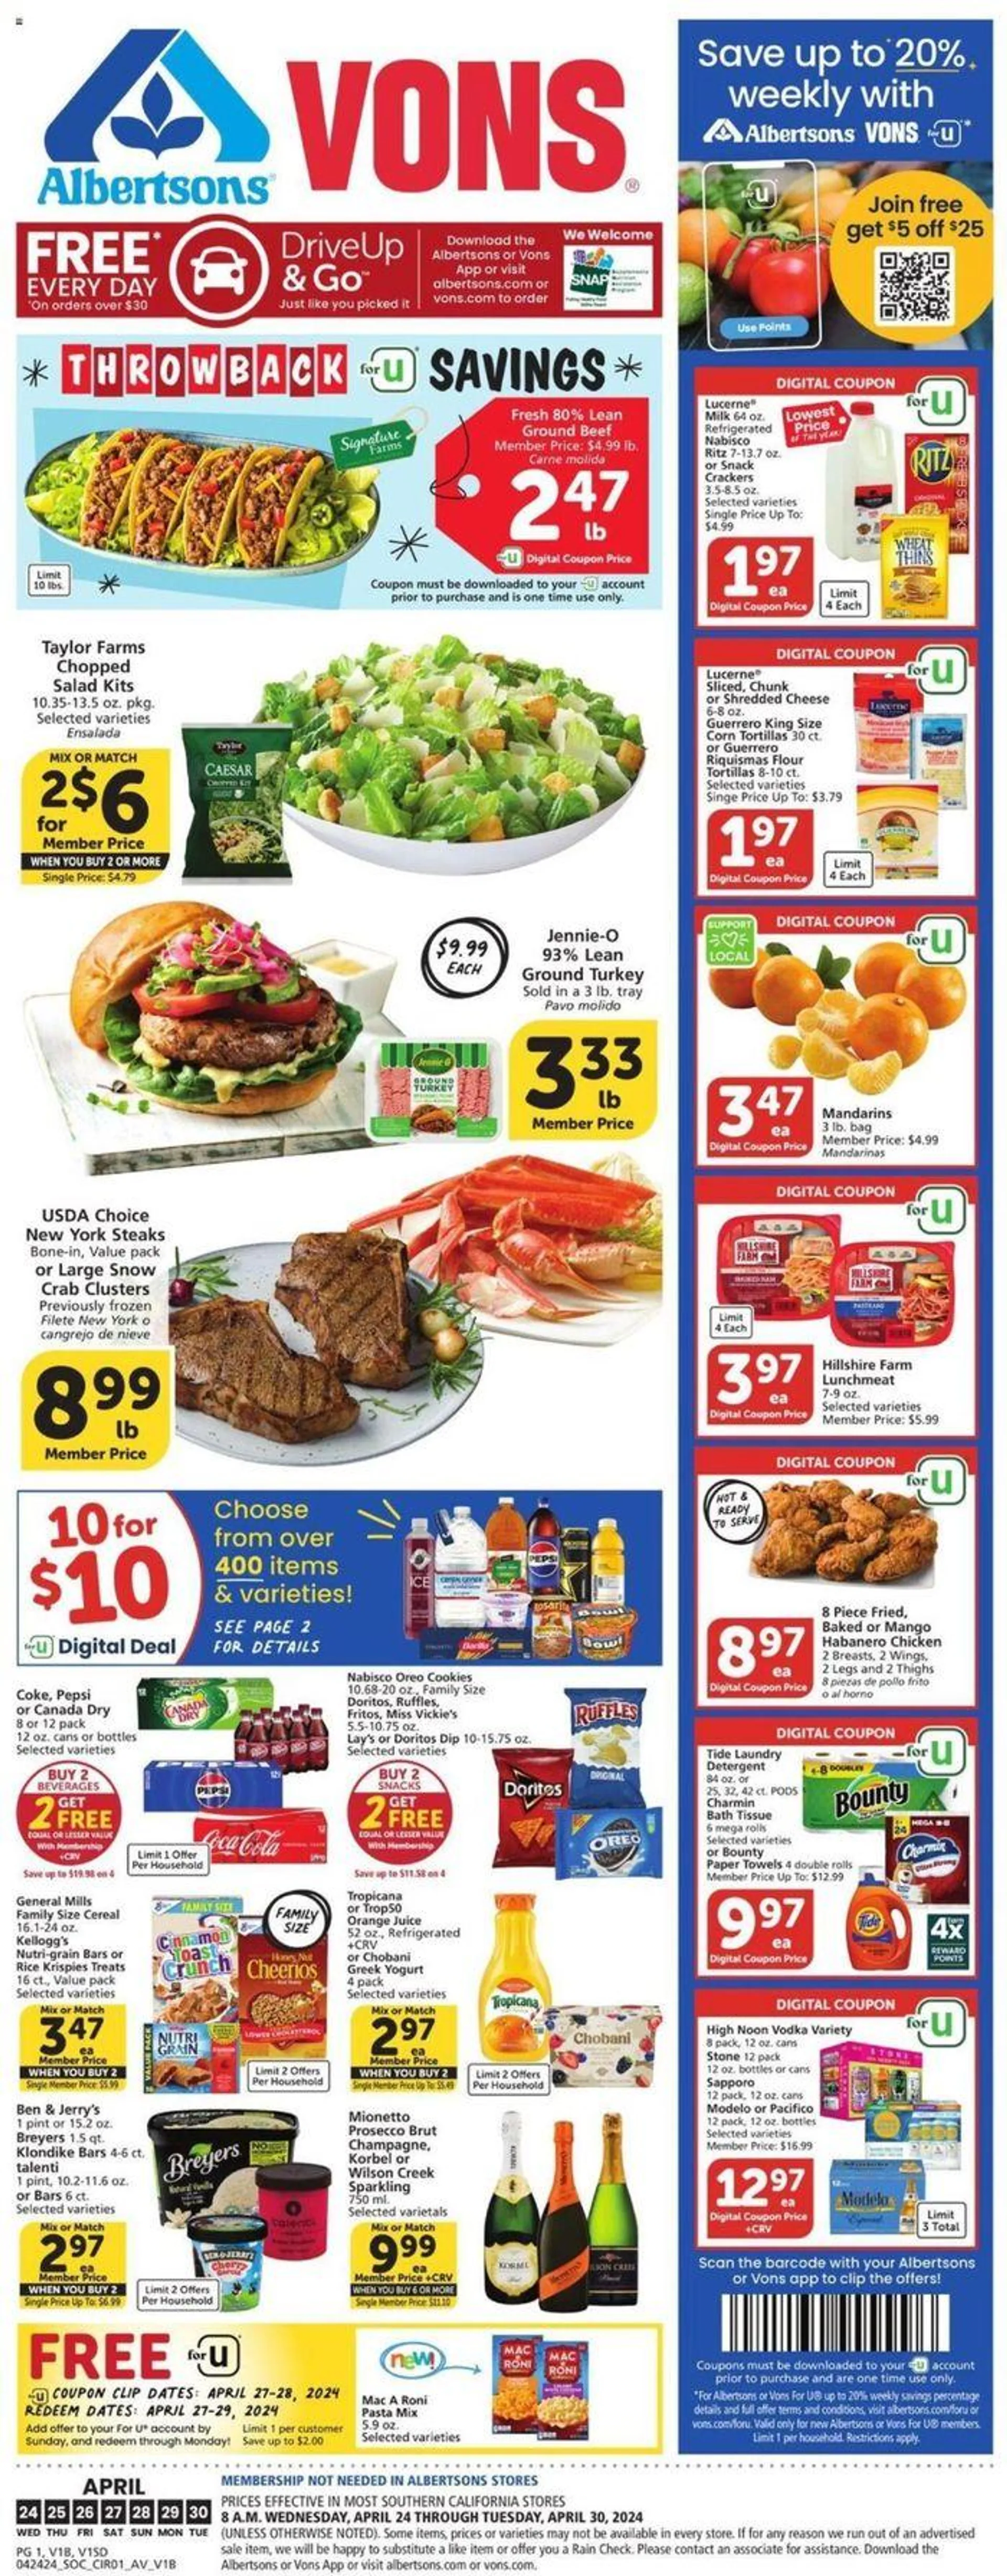 Vons weekly ad - 1